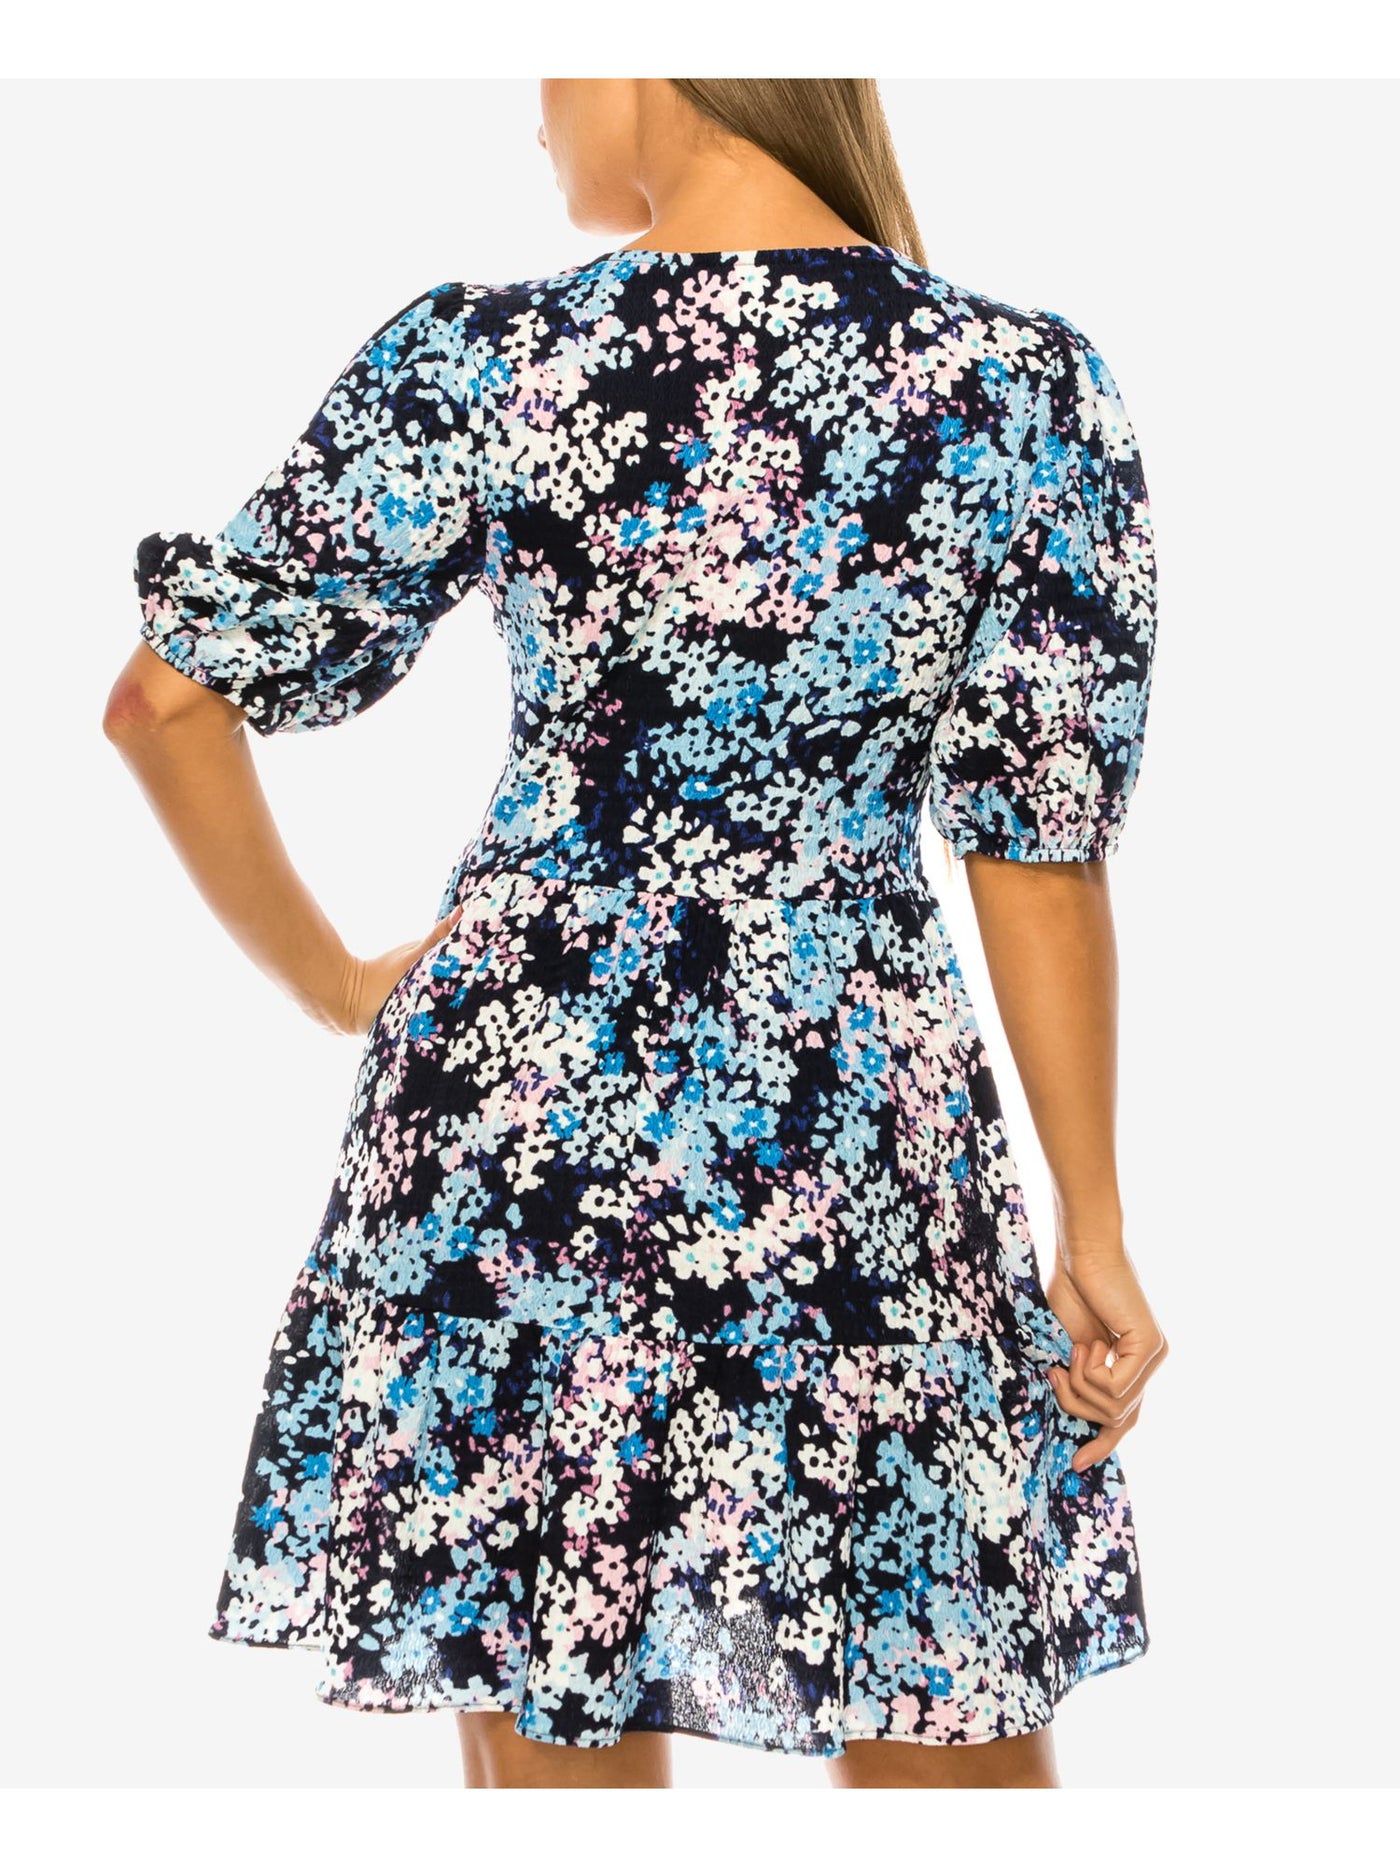 B DARLIN Womens Navy Printed Pouf Sleeve V Neck Above The Knee Party A-Line Dress Juniors 9\10